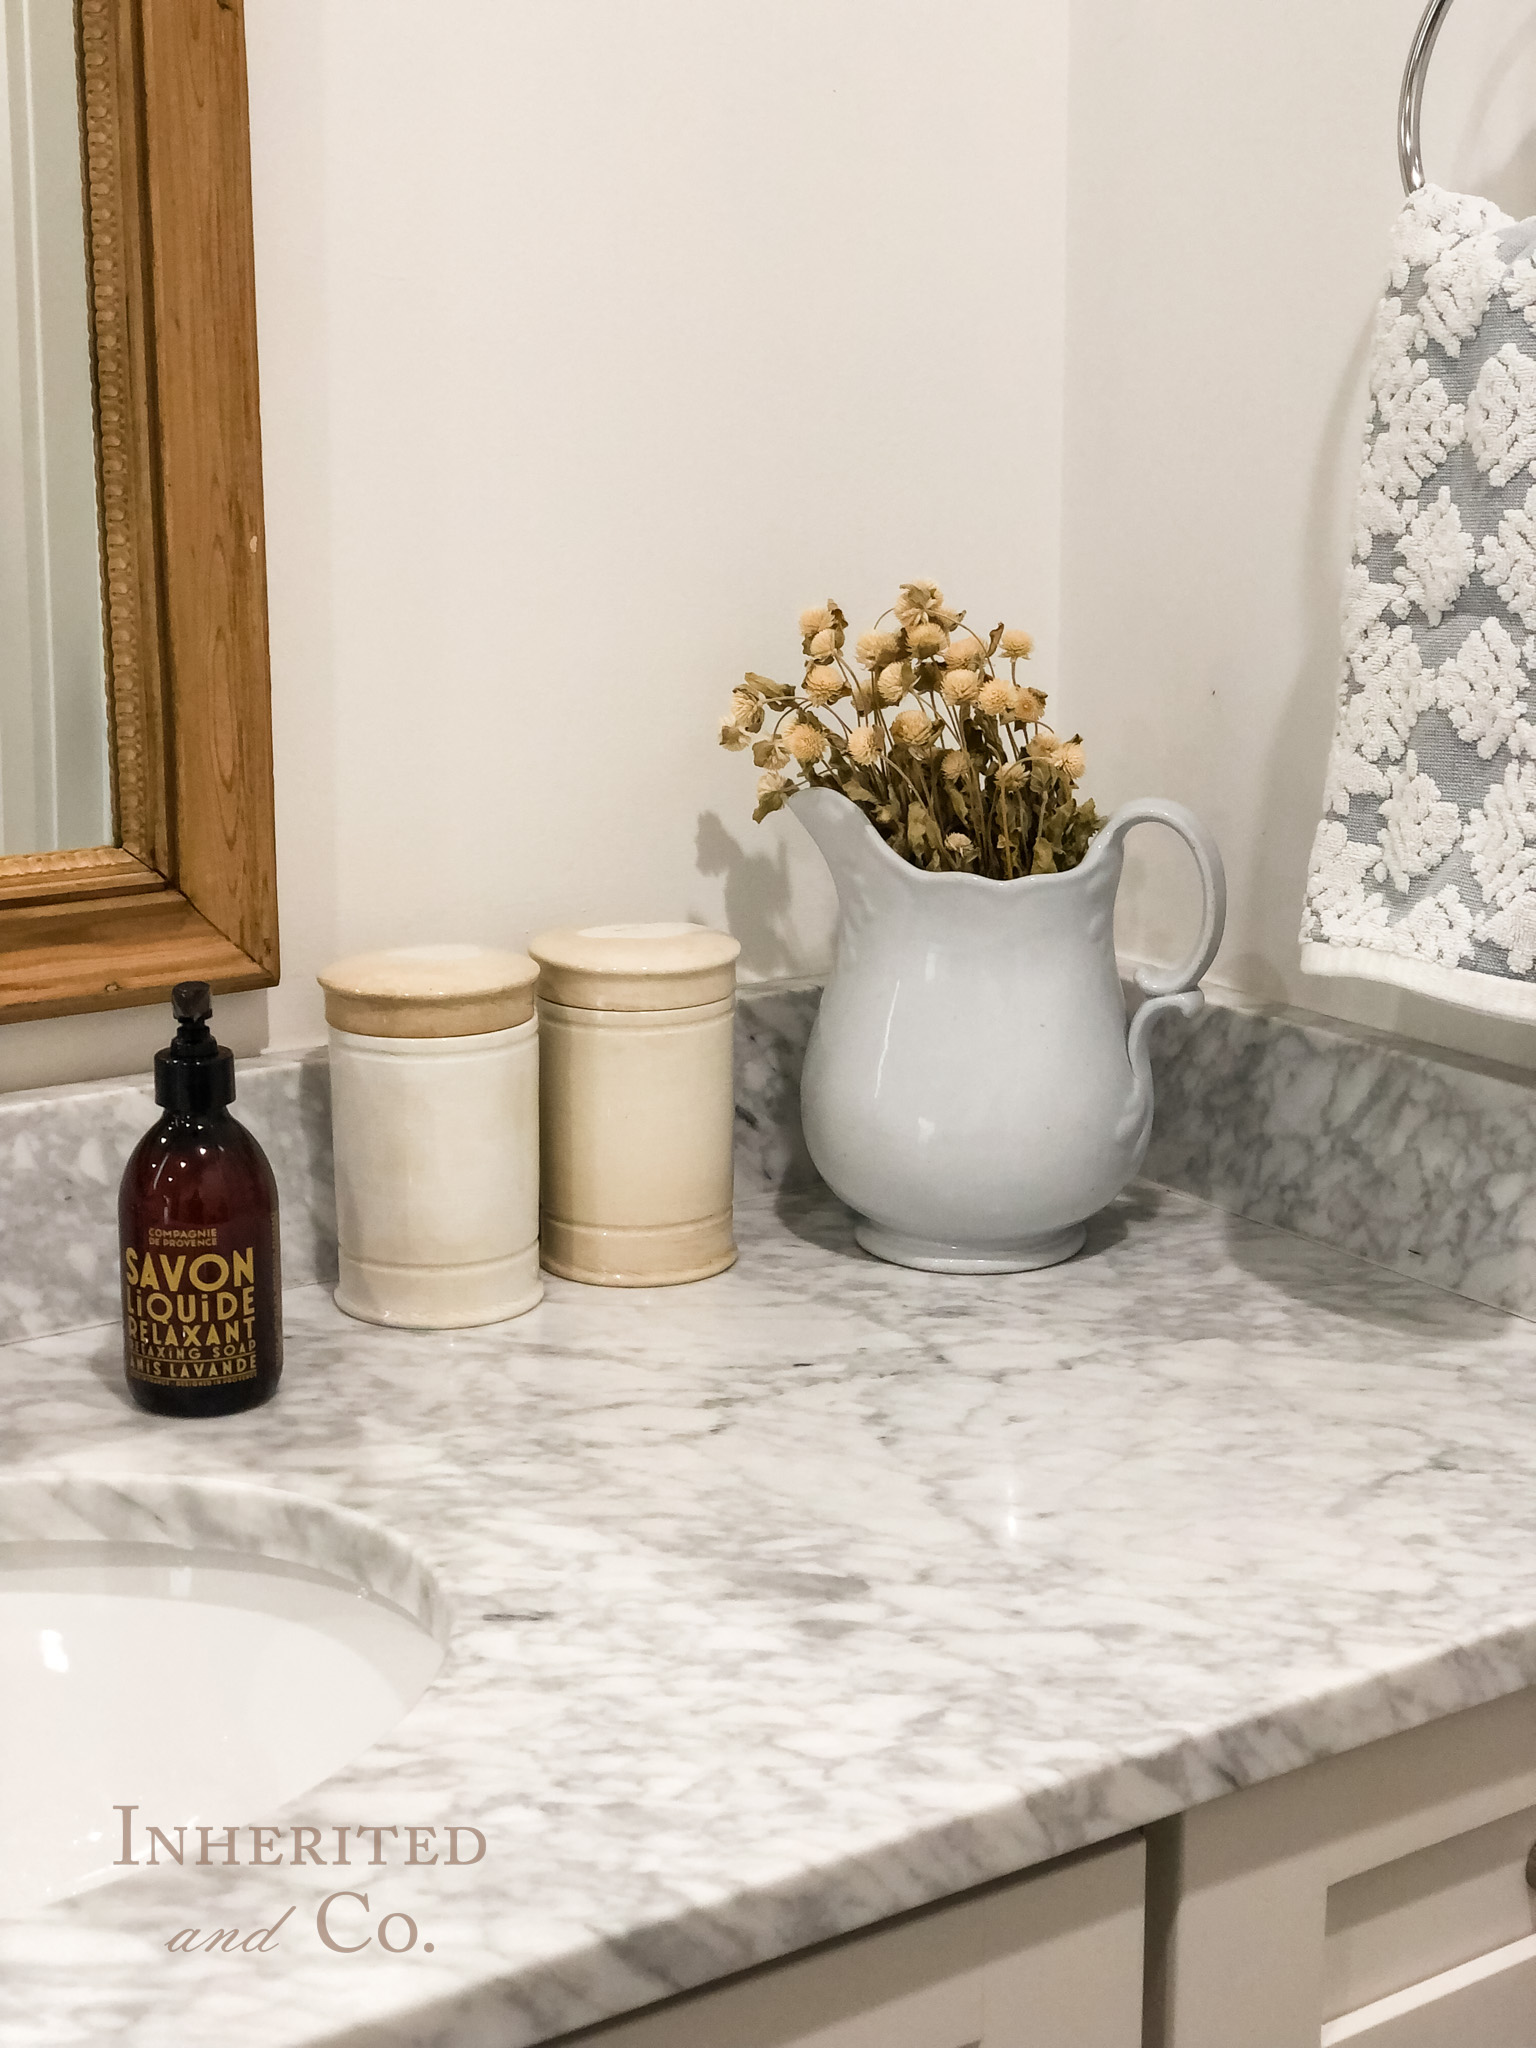 French Pharmacy Jars and an ironstone pitchers used for organization and decor on a bathroom countertop